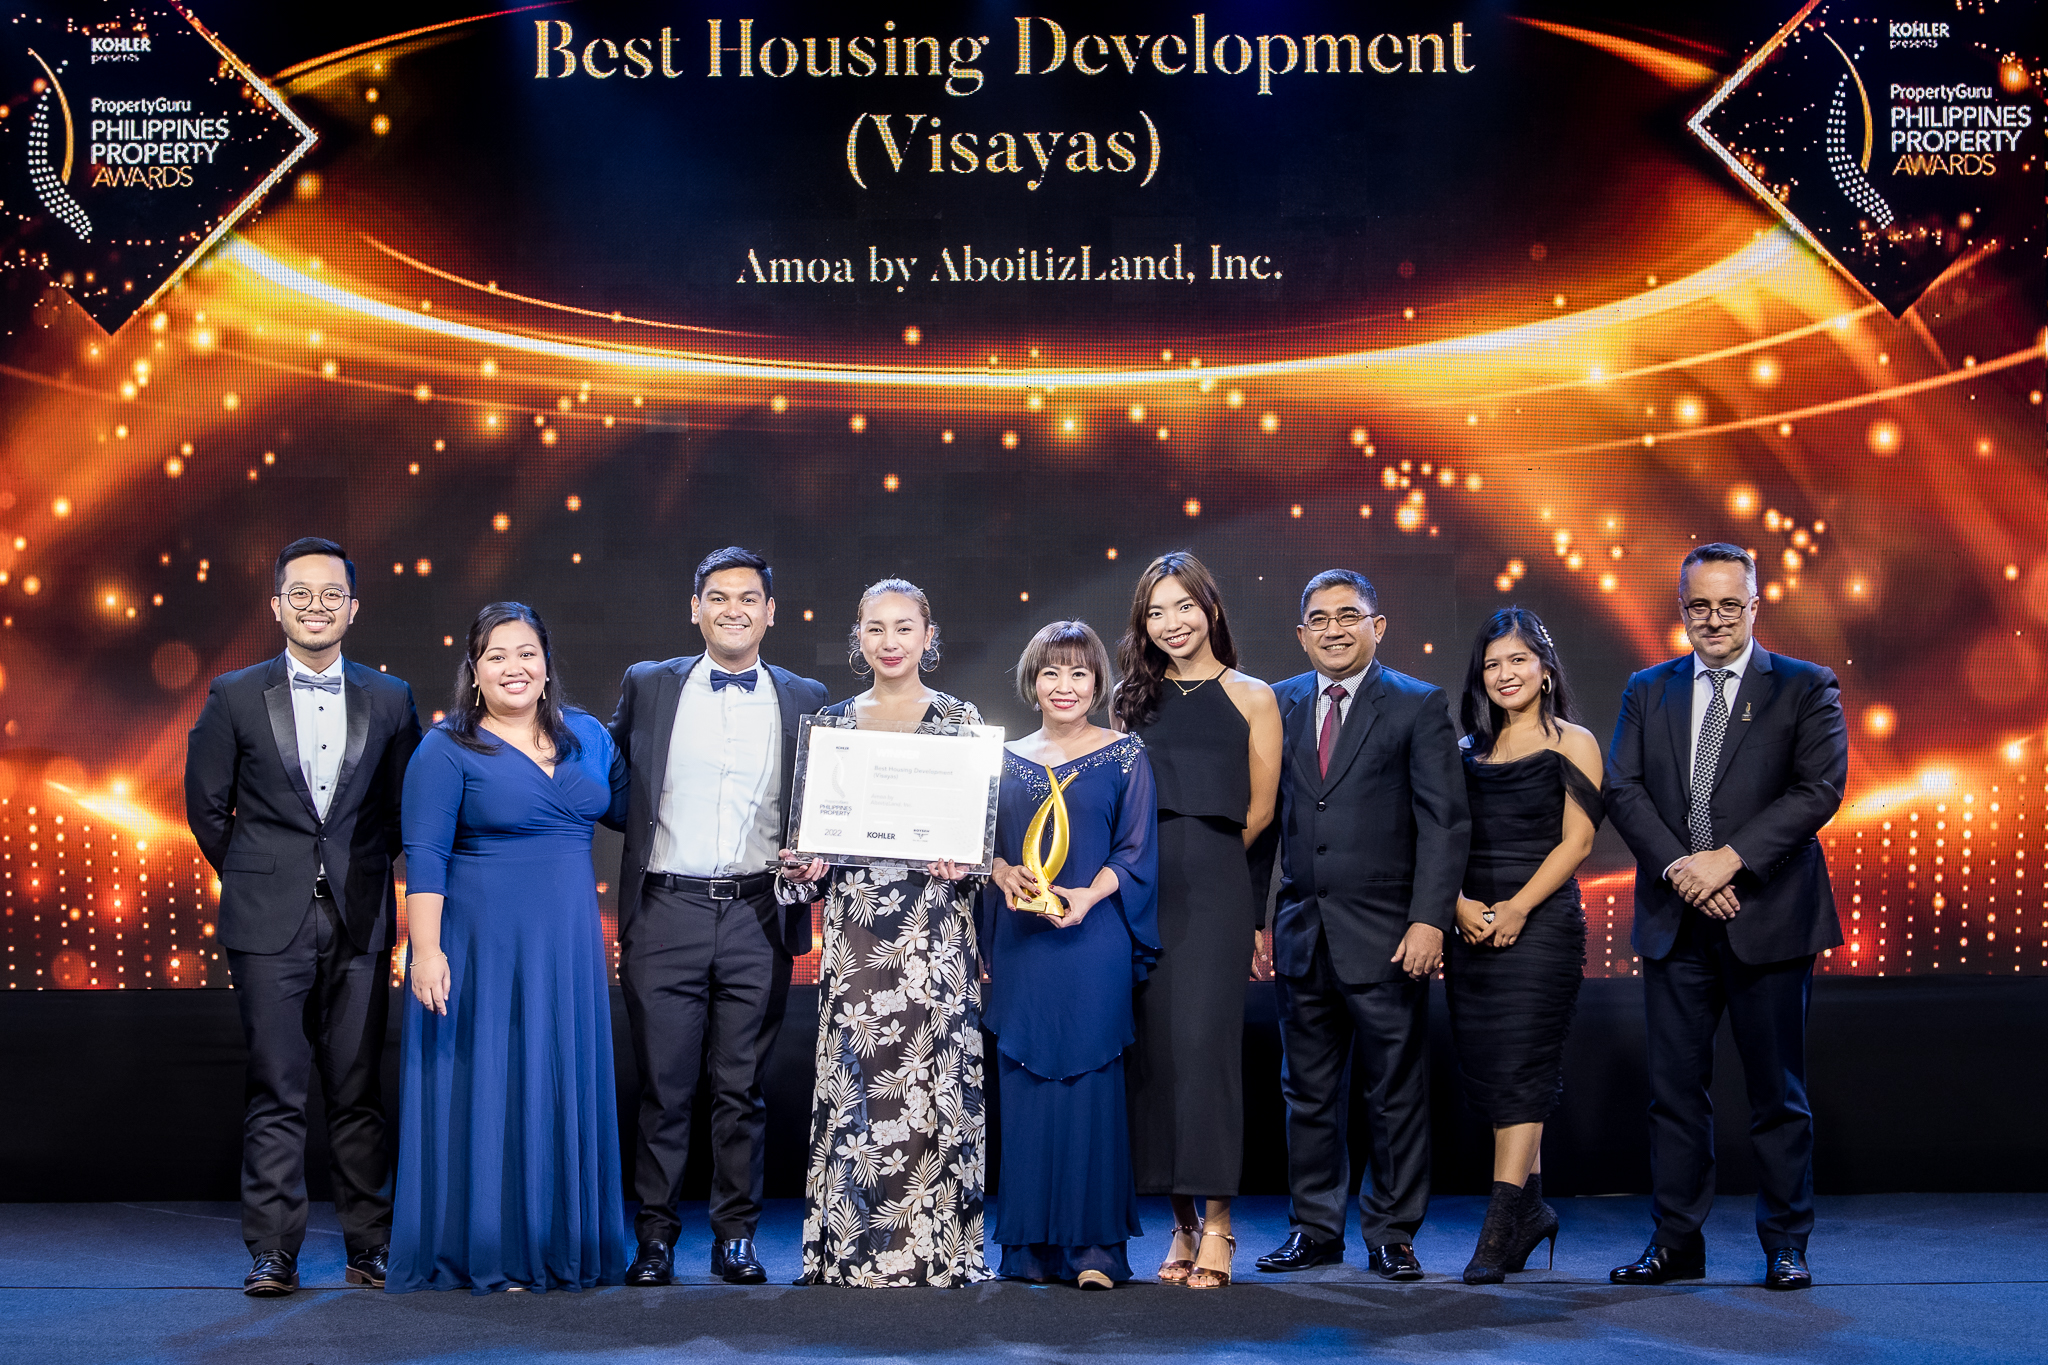 Amoa is Awarded Best Housing Development in Visayas by PropertyGuru at the 2022 Philippine Property Awards